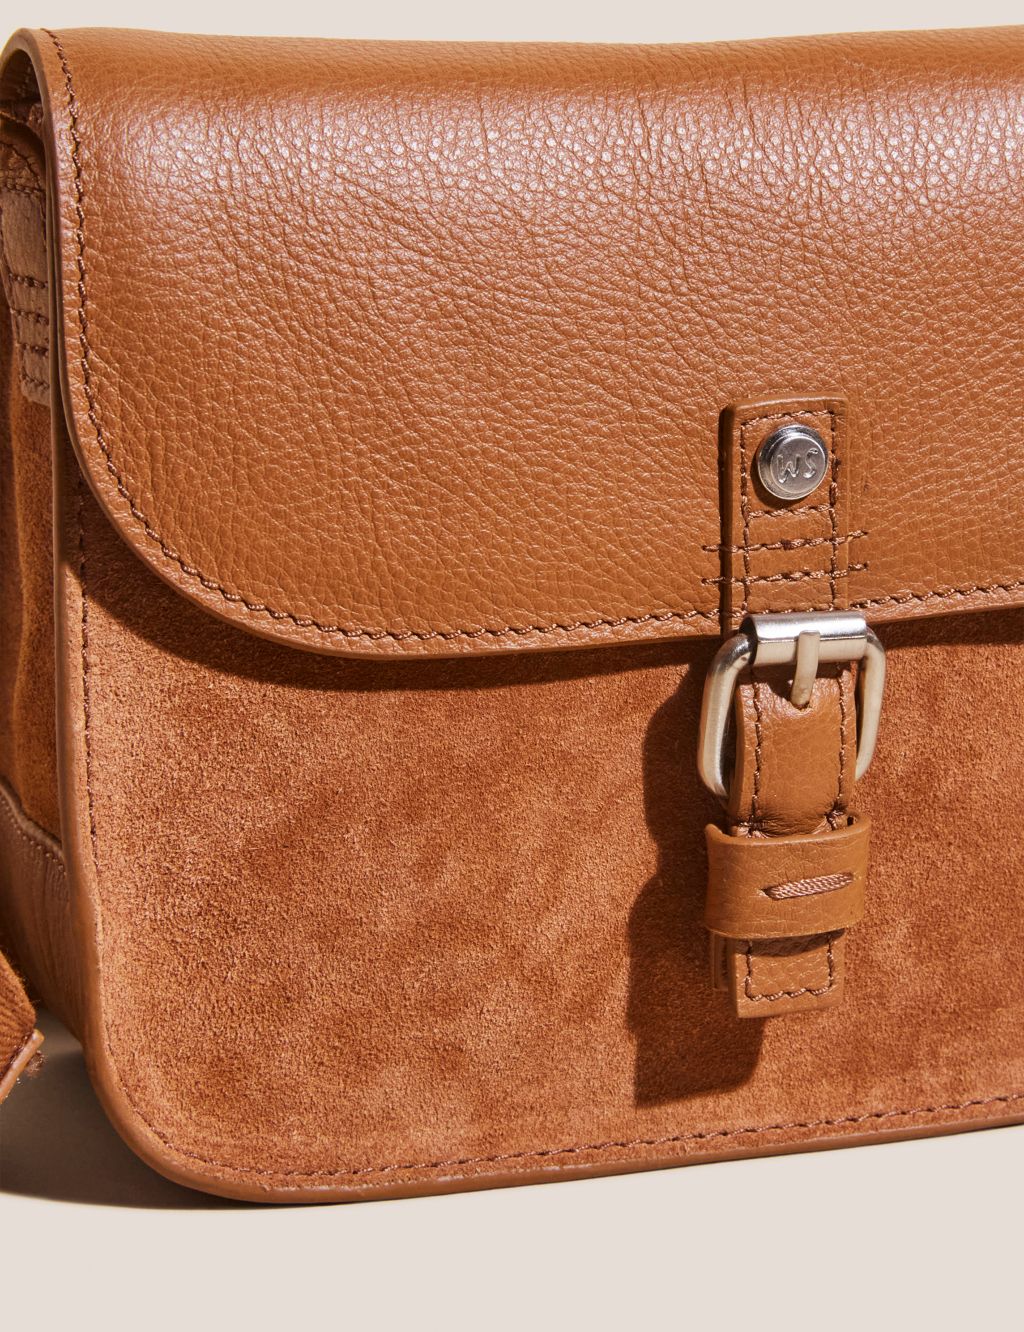 Leather Buckle Detail Cross Body Bag image 2